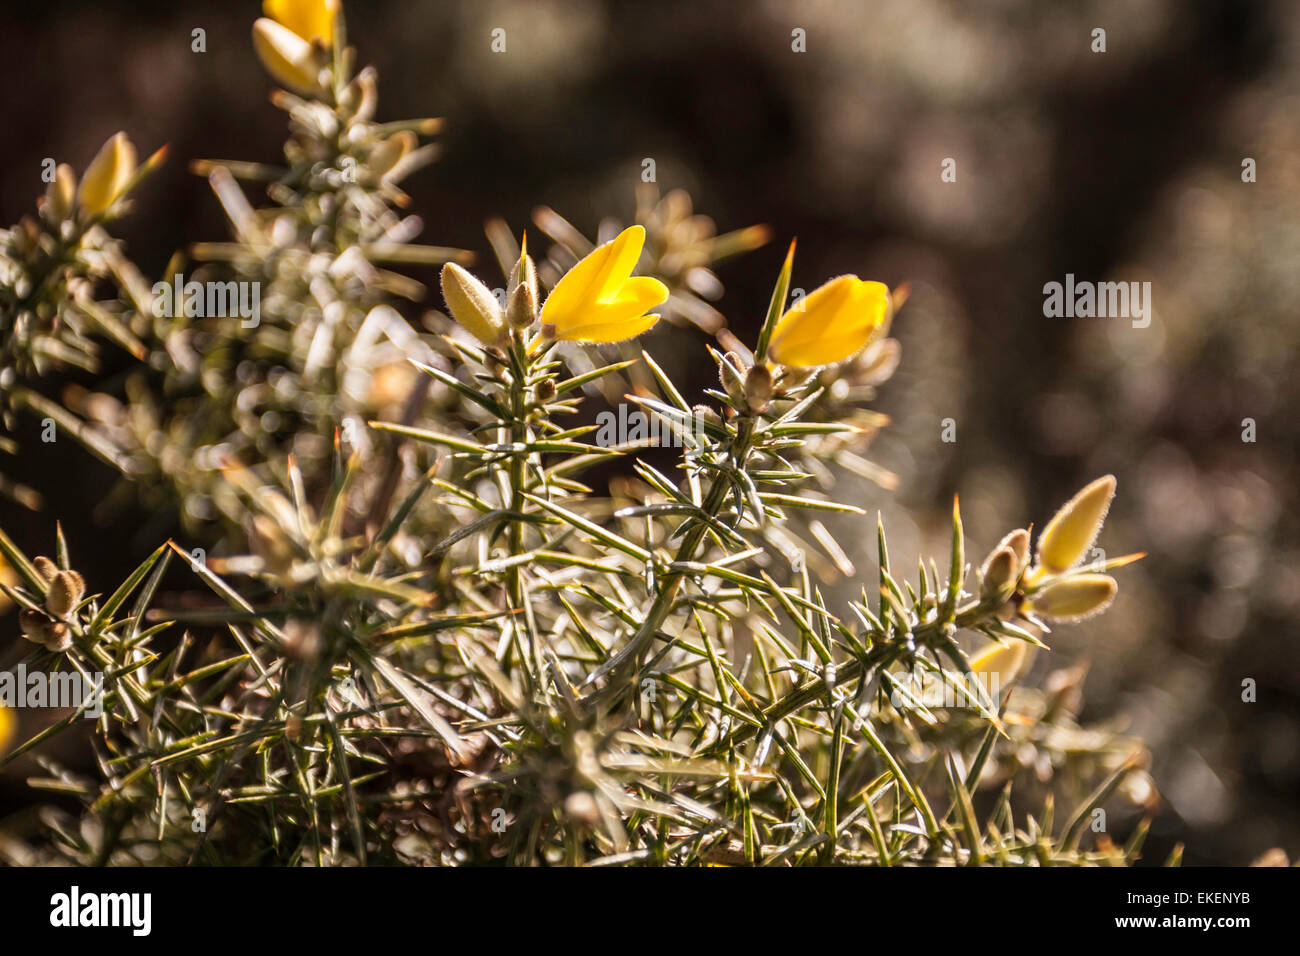 beautiful close up of gorse plant and flowers Stock Photo